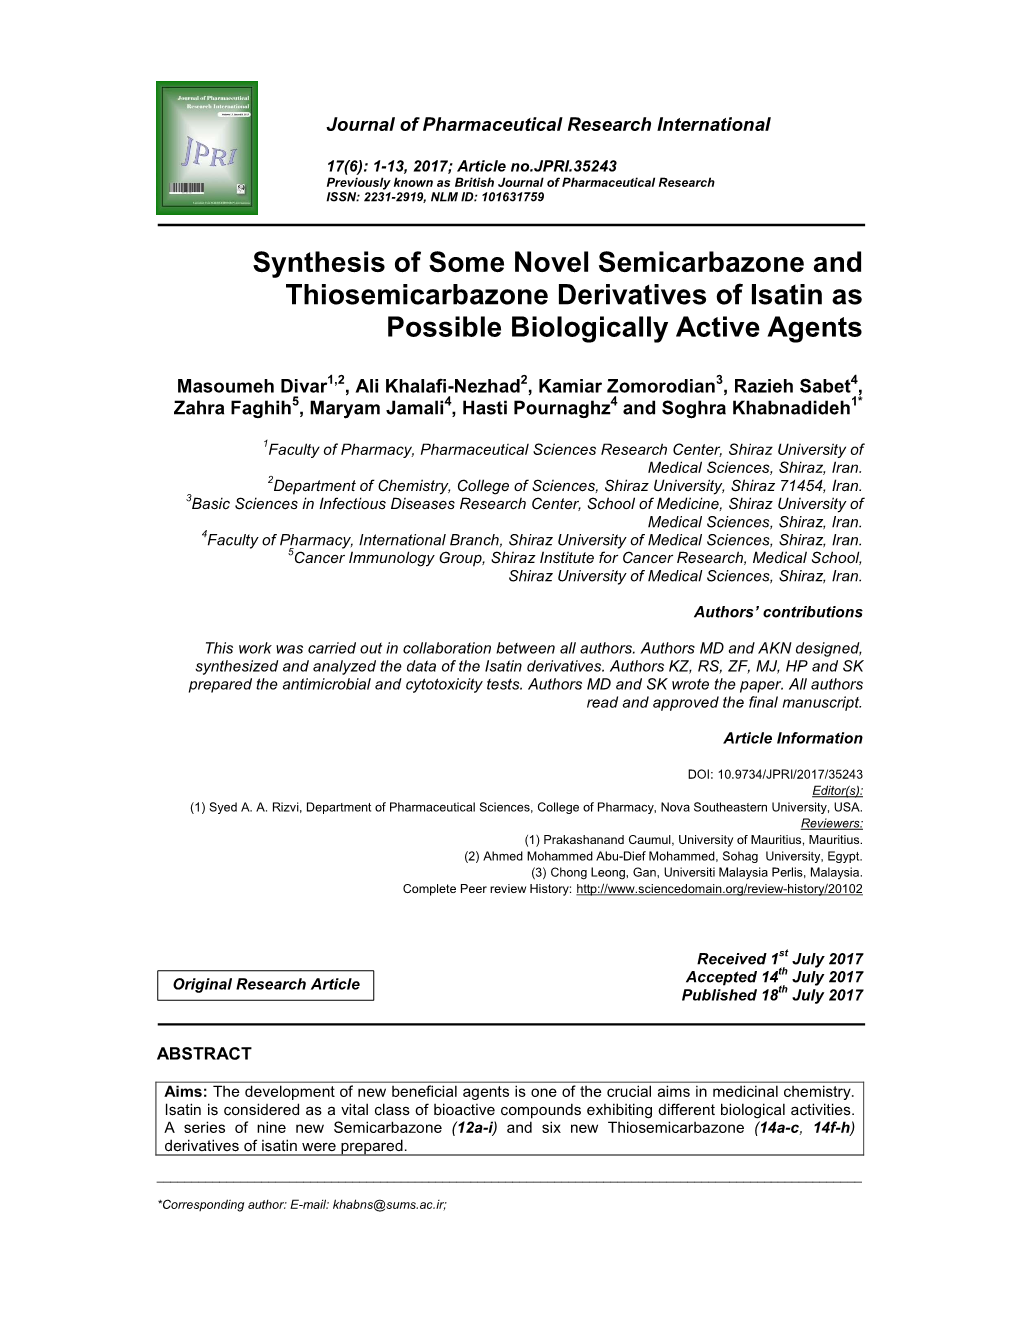 Synthesis of Some Novel Semicarbazone and Thiosemicarbazone Derivatives of Isatin As Possible Biologically Active Agents